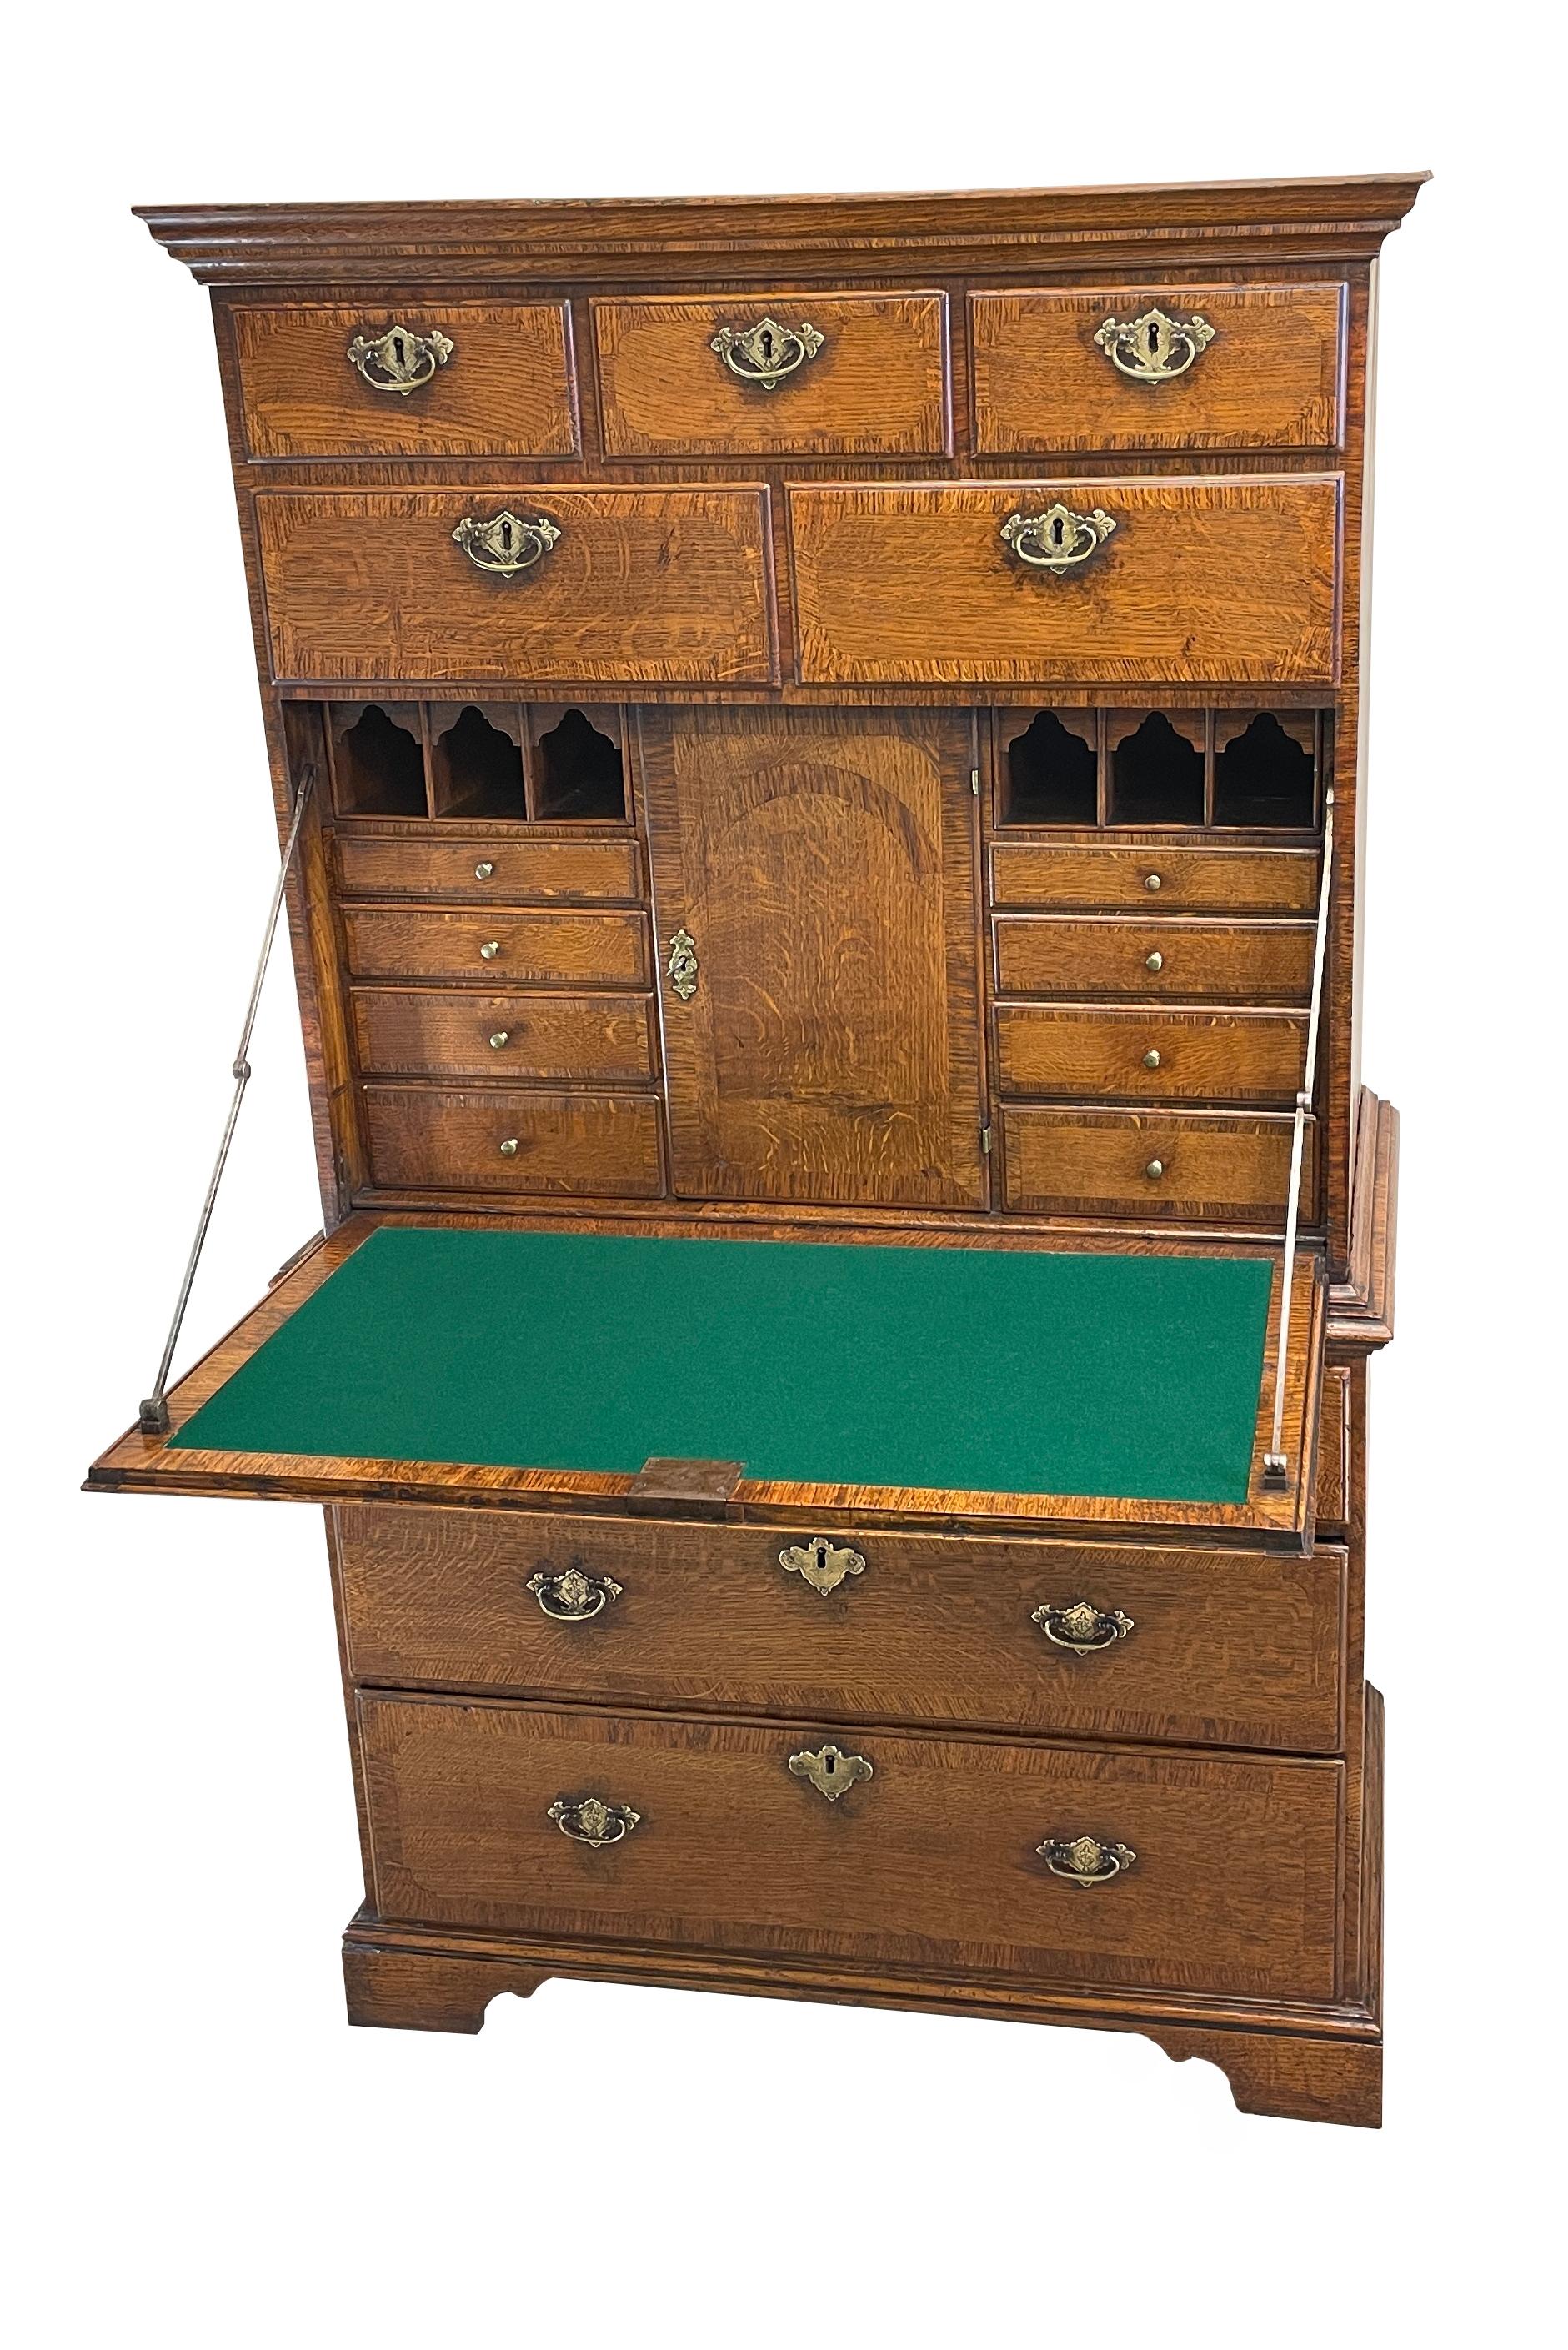 A charming Georgian 18th century George 1 period
oak escritoire, or secrétaire tallboy, of very unusual
design having various drawers surrounding central
fall front enclosing further small drawers, pigeon
holes & cupboard doors, with elegant